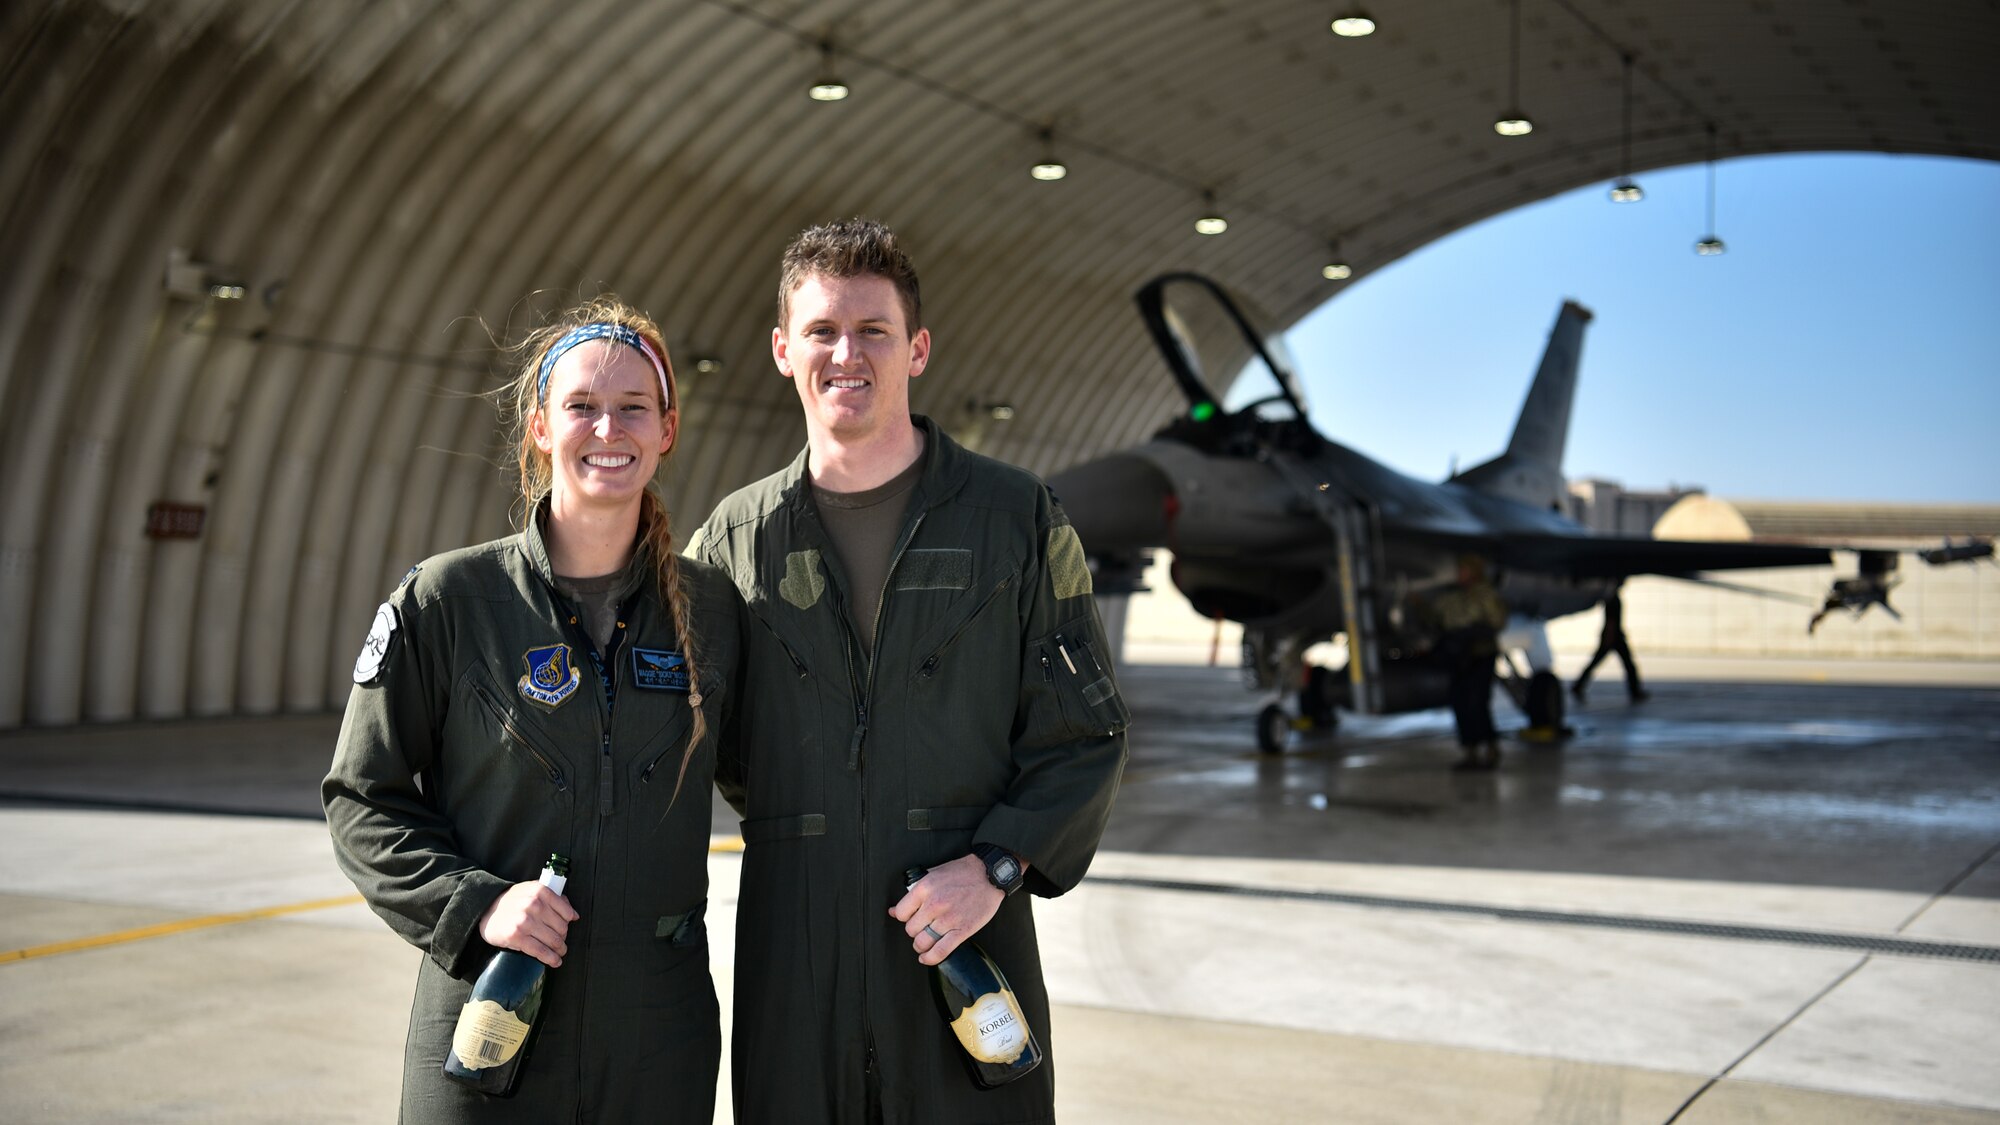 Married pilots pose for a photo together.